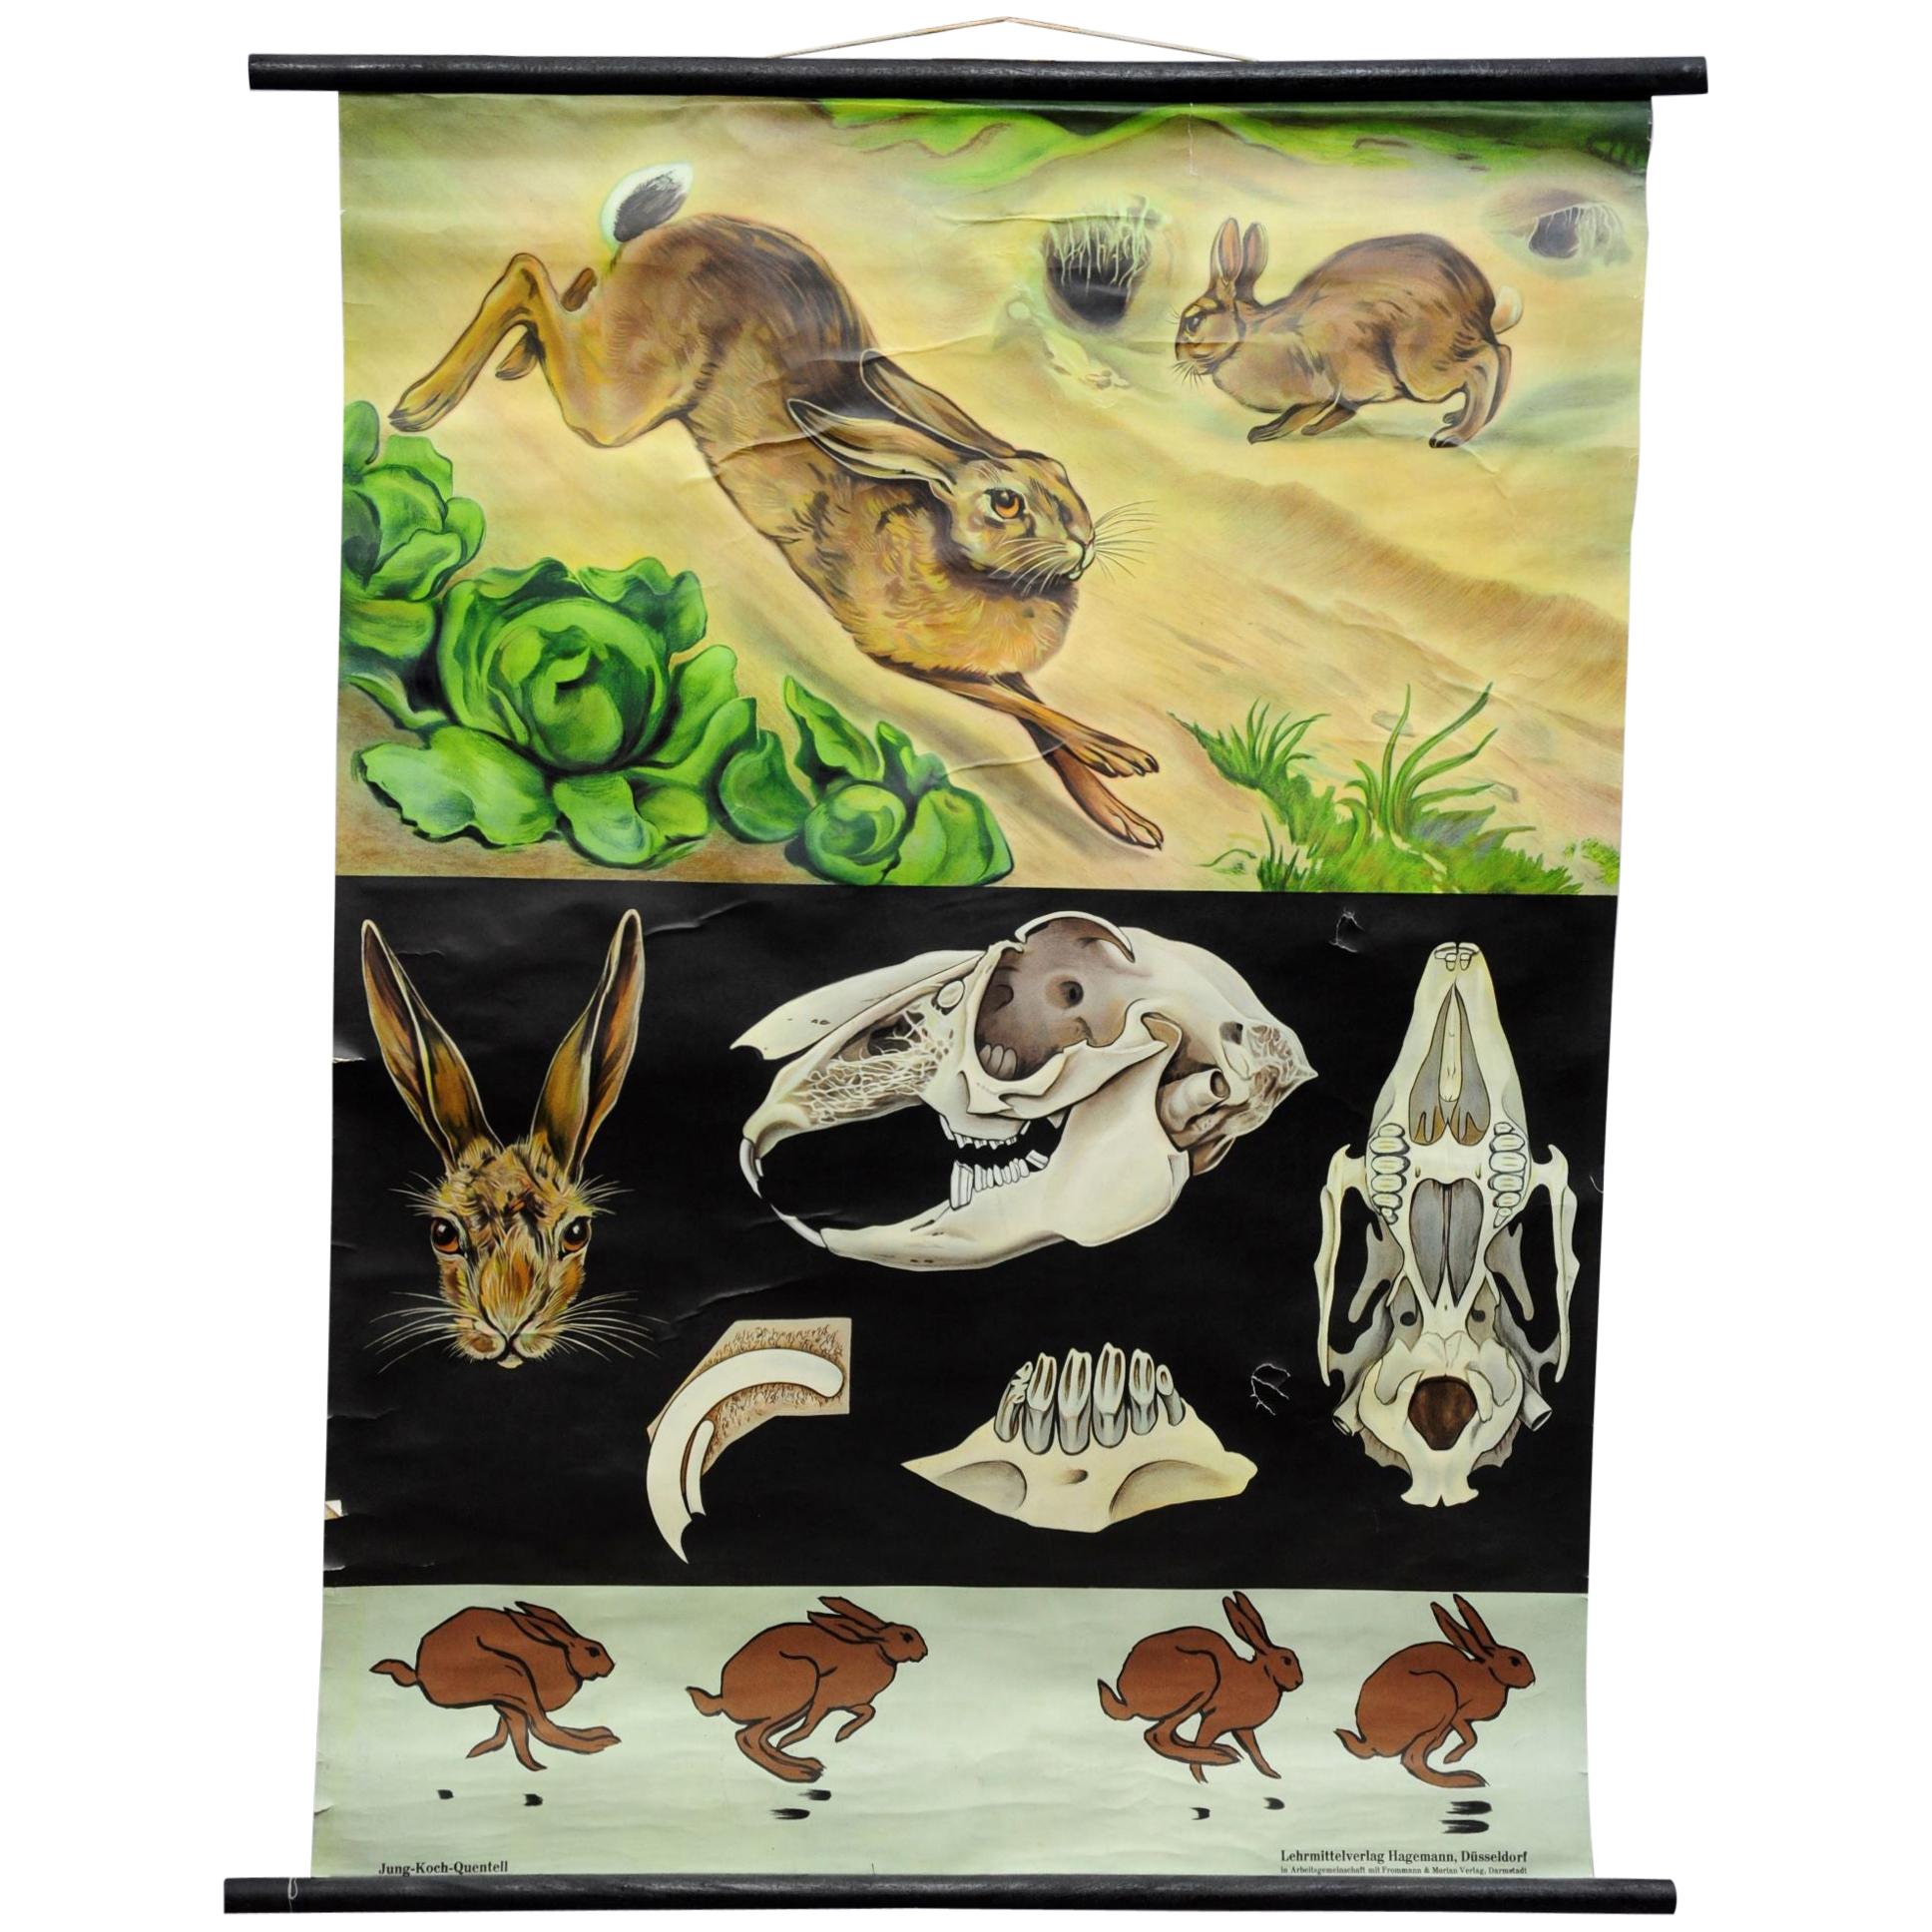 Jung Koch Quentell Vintage Mural Wall Chart Poster Brown Hare Common Rabbit